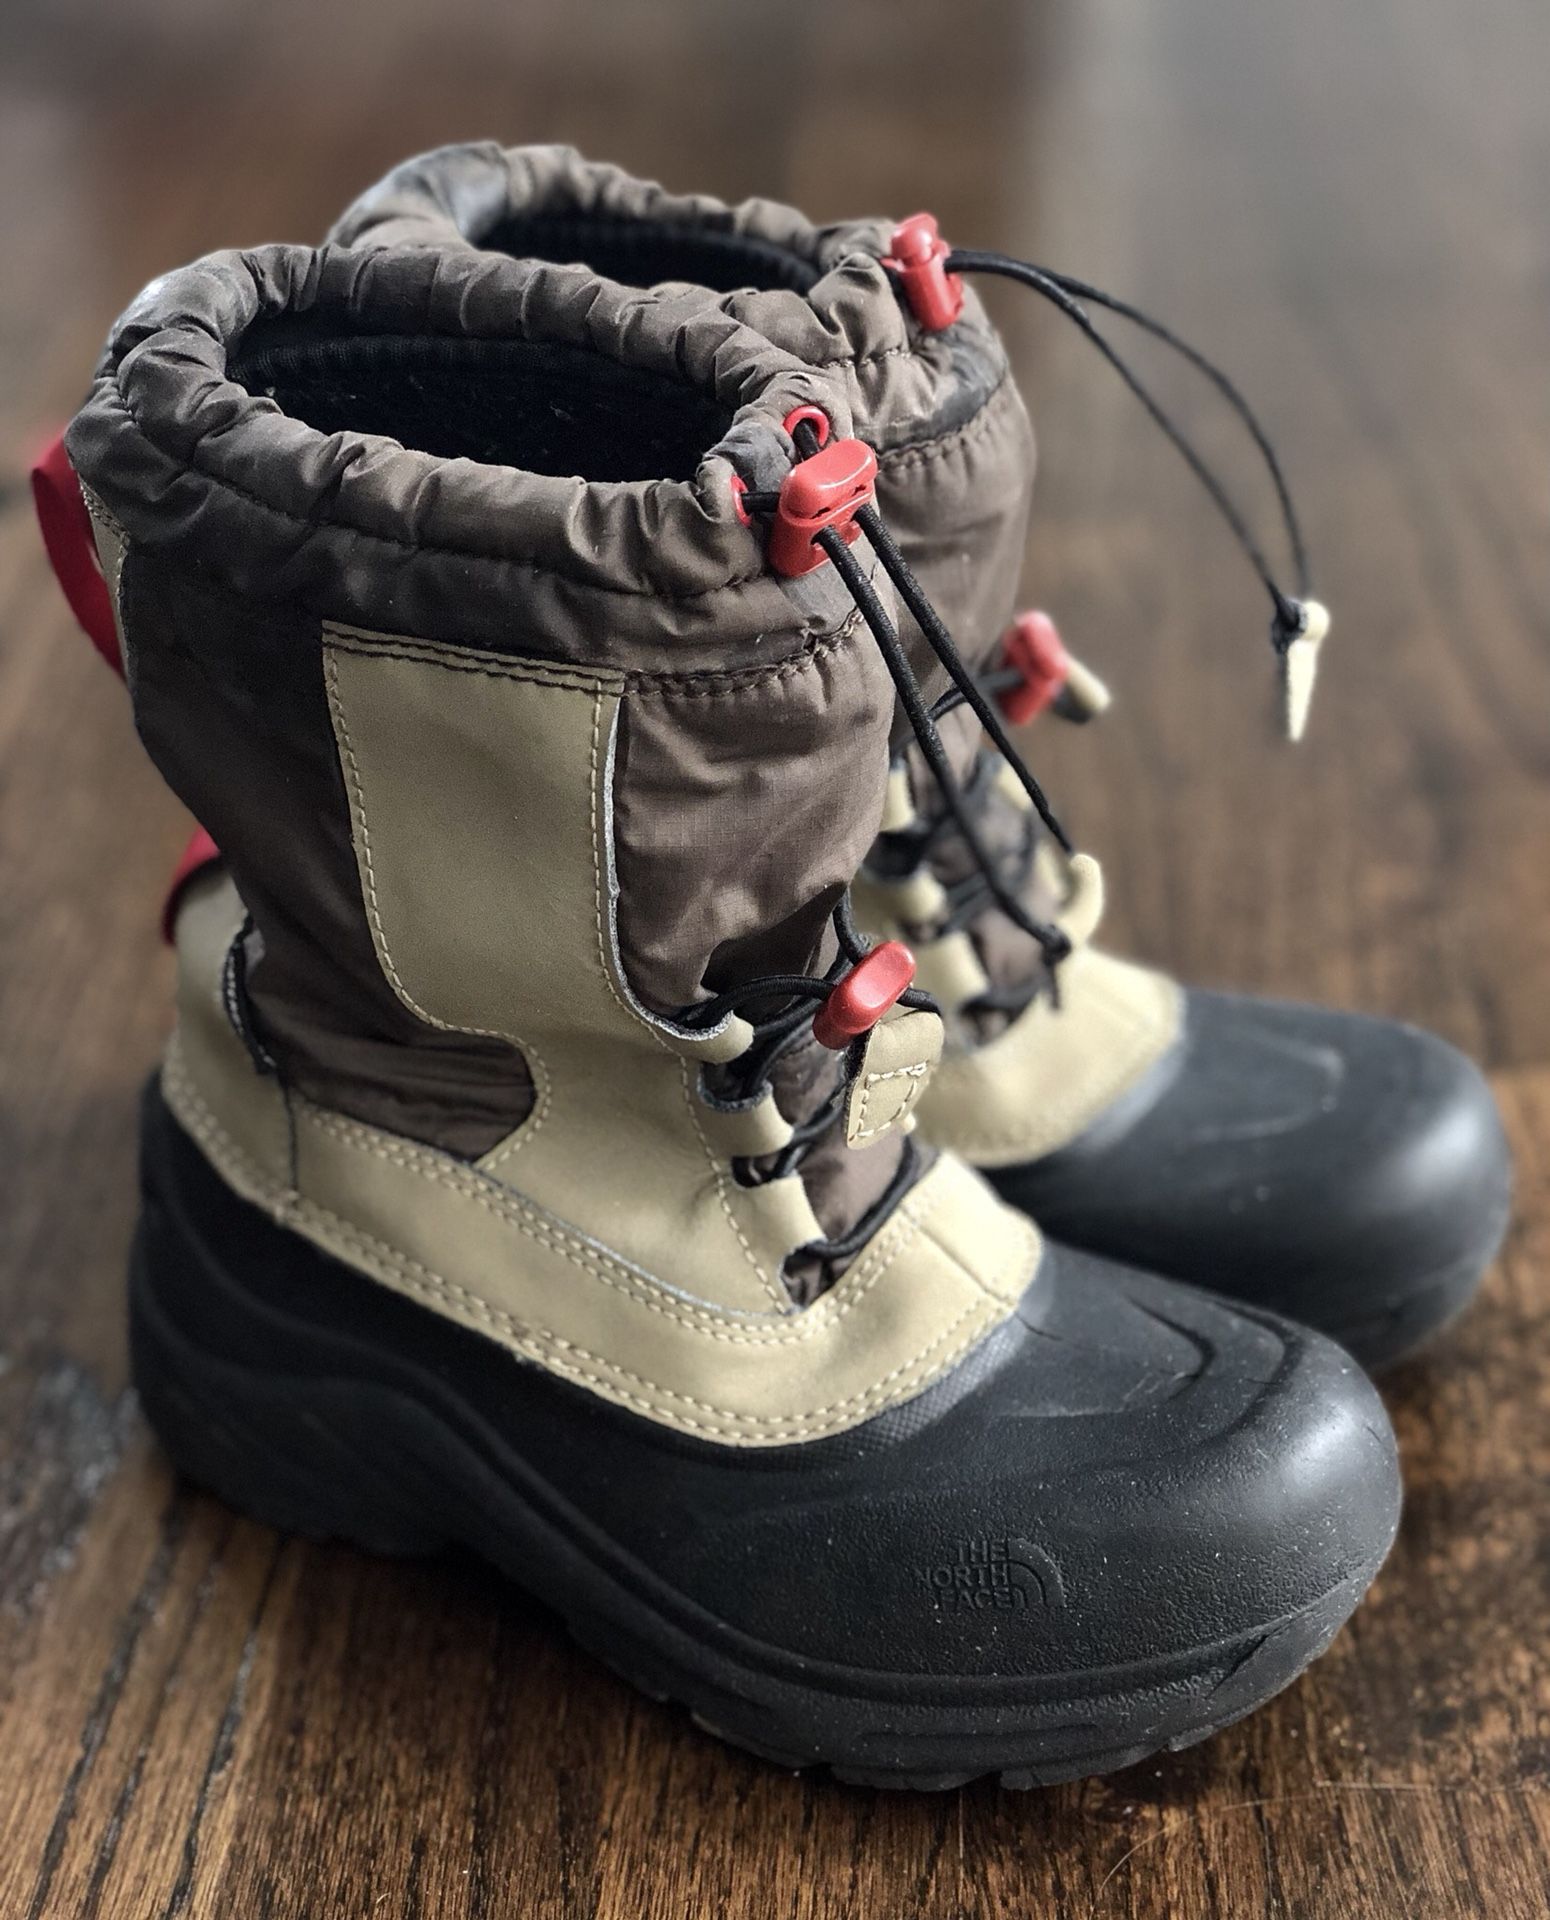 NORTH FACE black tan red winter insulated waterproof snow boots removable inserts - Size 2 Kids